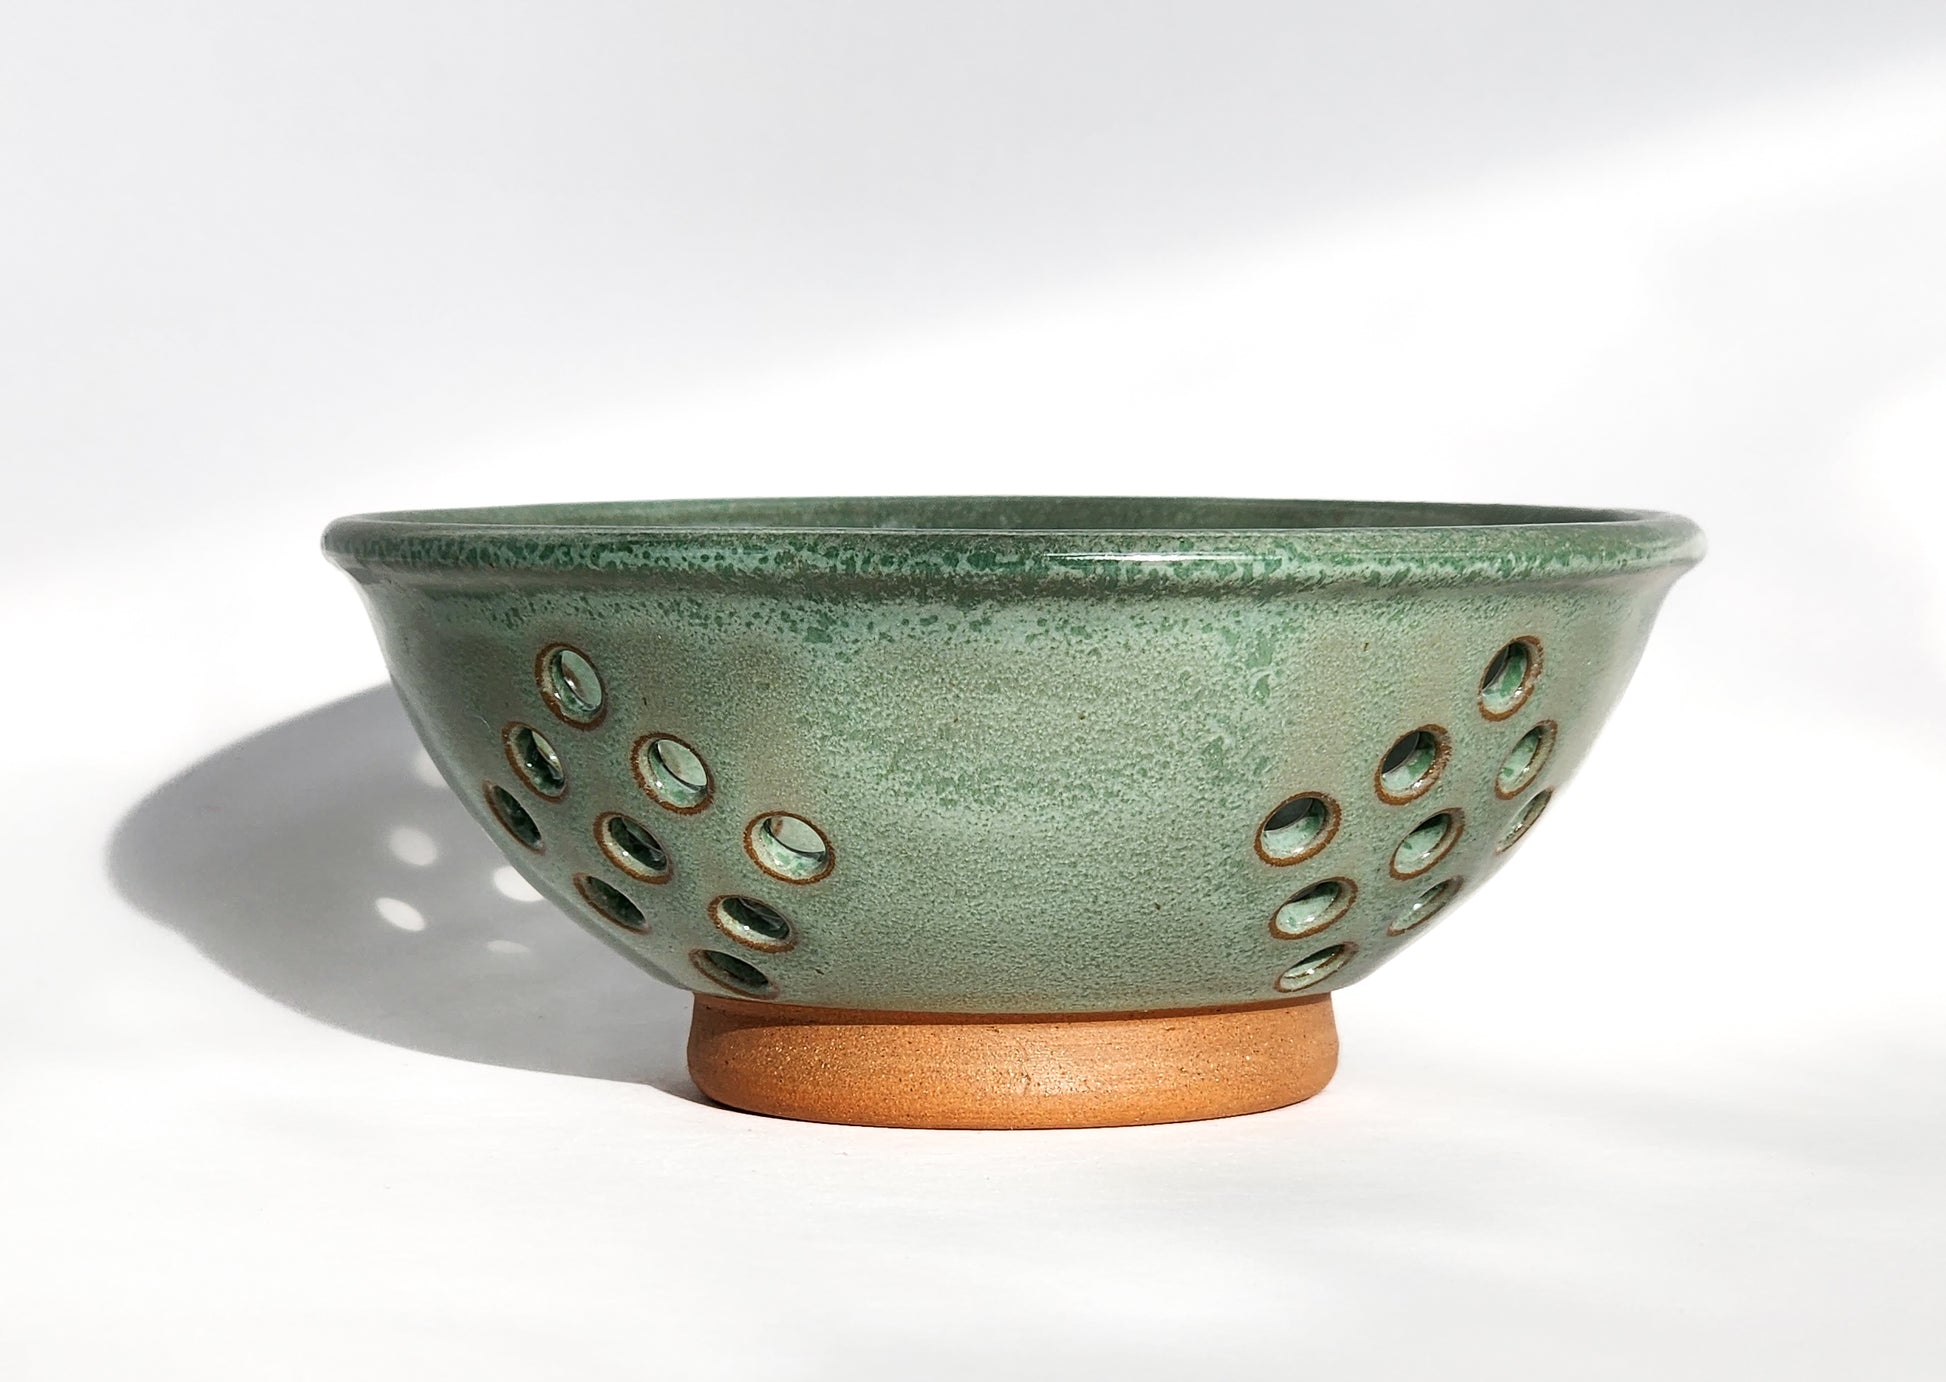 Image: Clinton Pottery's Handmade Small Colander in Light Green – A fresh and practical 2.25 cup colander, expertly crafted. This Light Green piece adds a touch of nature's vibrancy to your kitchen, reminiscent of spring foliage and the outdoors. Ideal for washing berries and smaller items, it seamlessly combines style with functionality. 